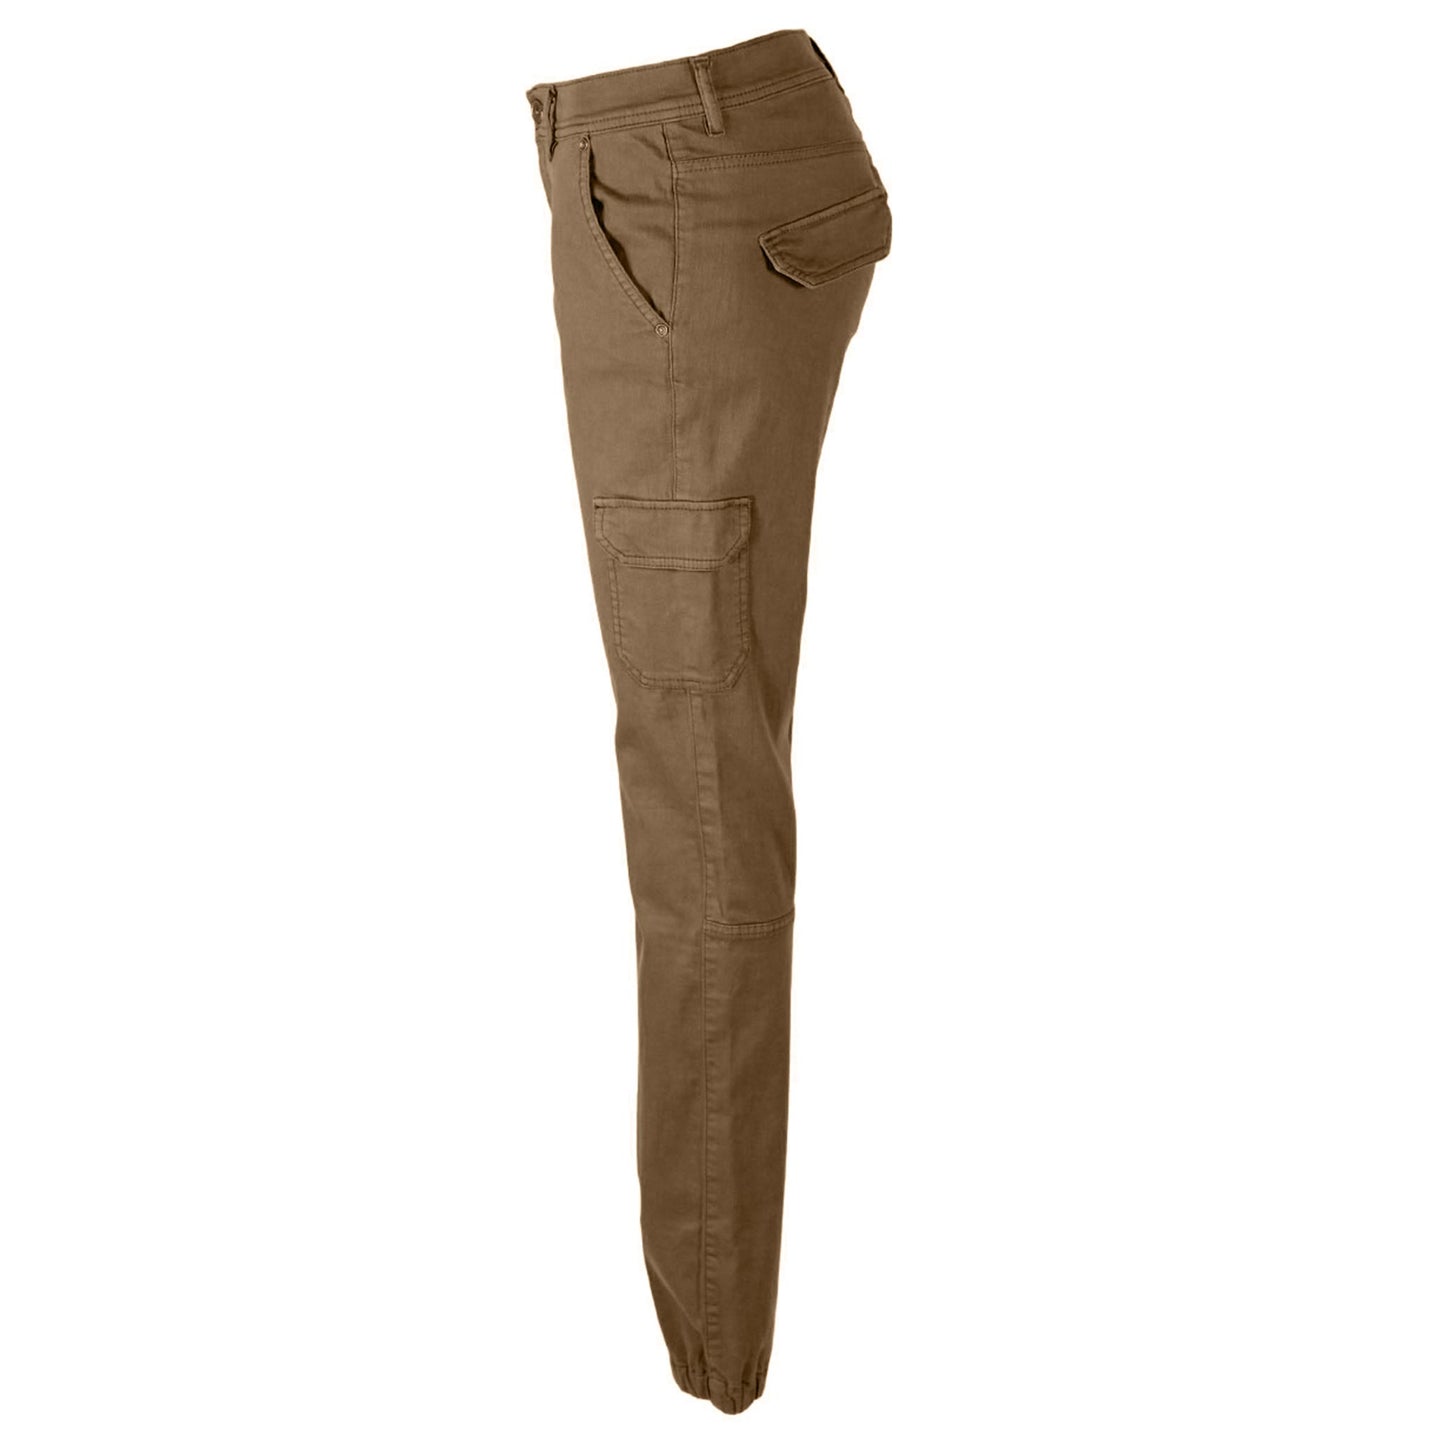 clothing tall women bloomers cargo pants